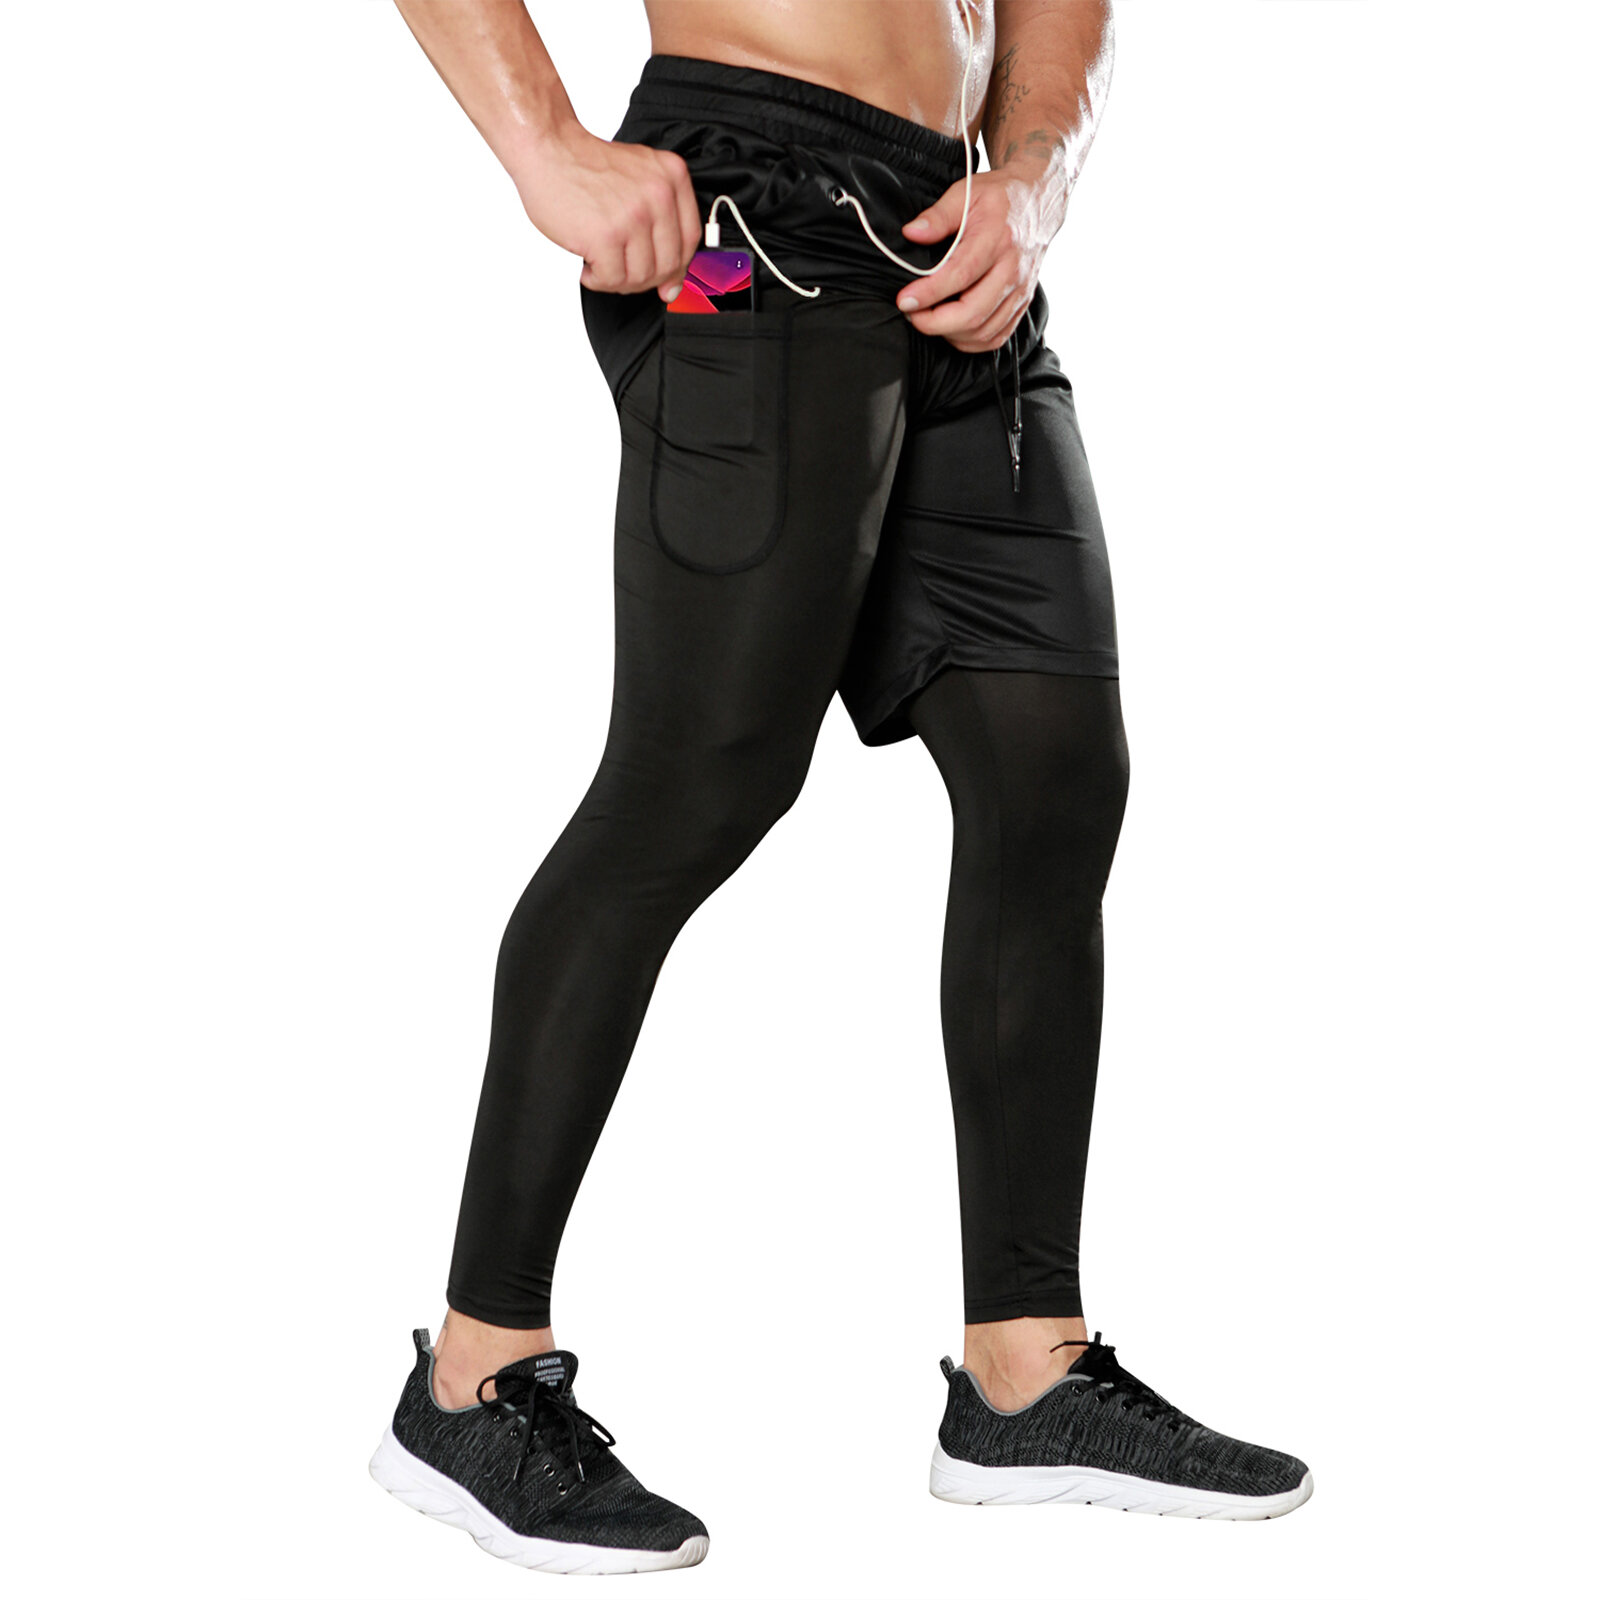 Men's Training Shorts with Leggings 2-in-1 DOUBLE UNDERS E-store   - Polish manufacturer of sportswear for fitness, Crossfit,  gym, running. Quick delivery and easy return and exchange